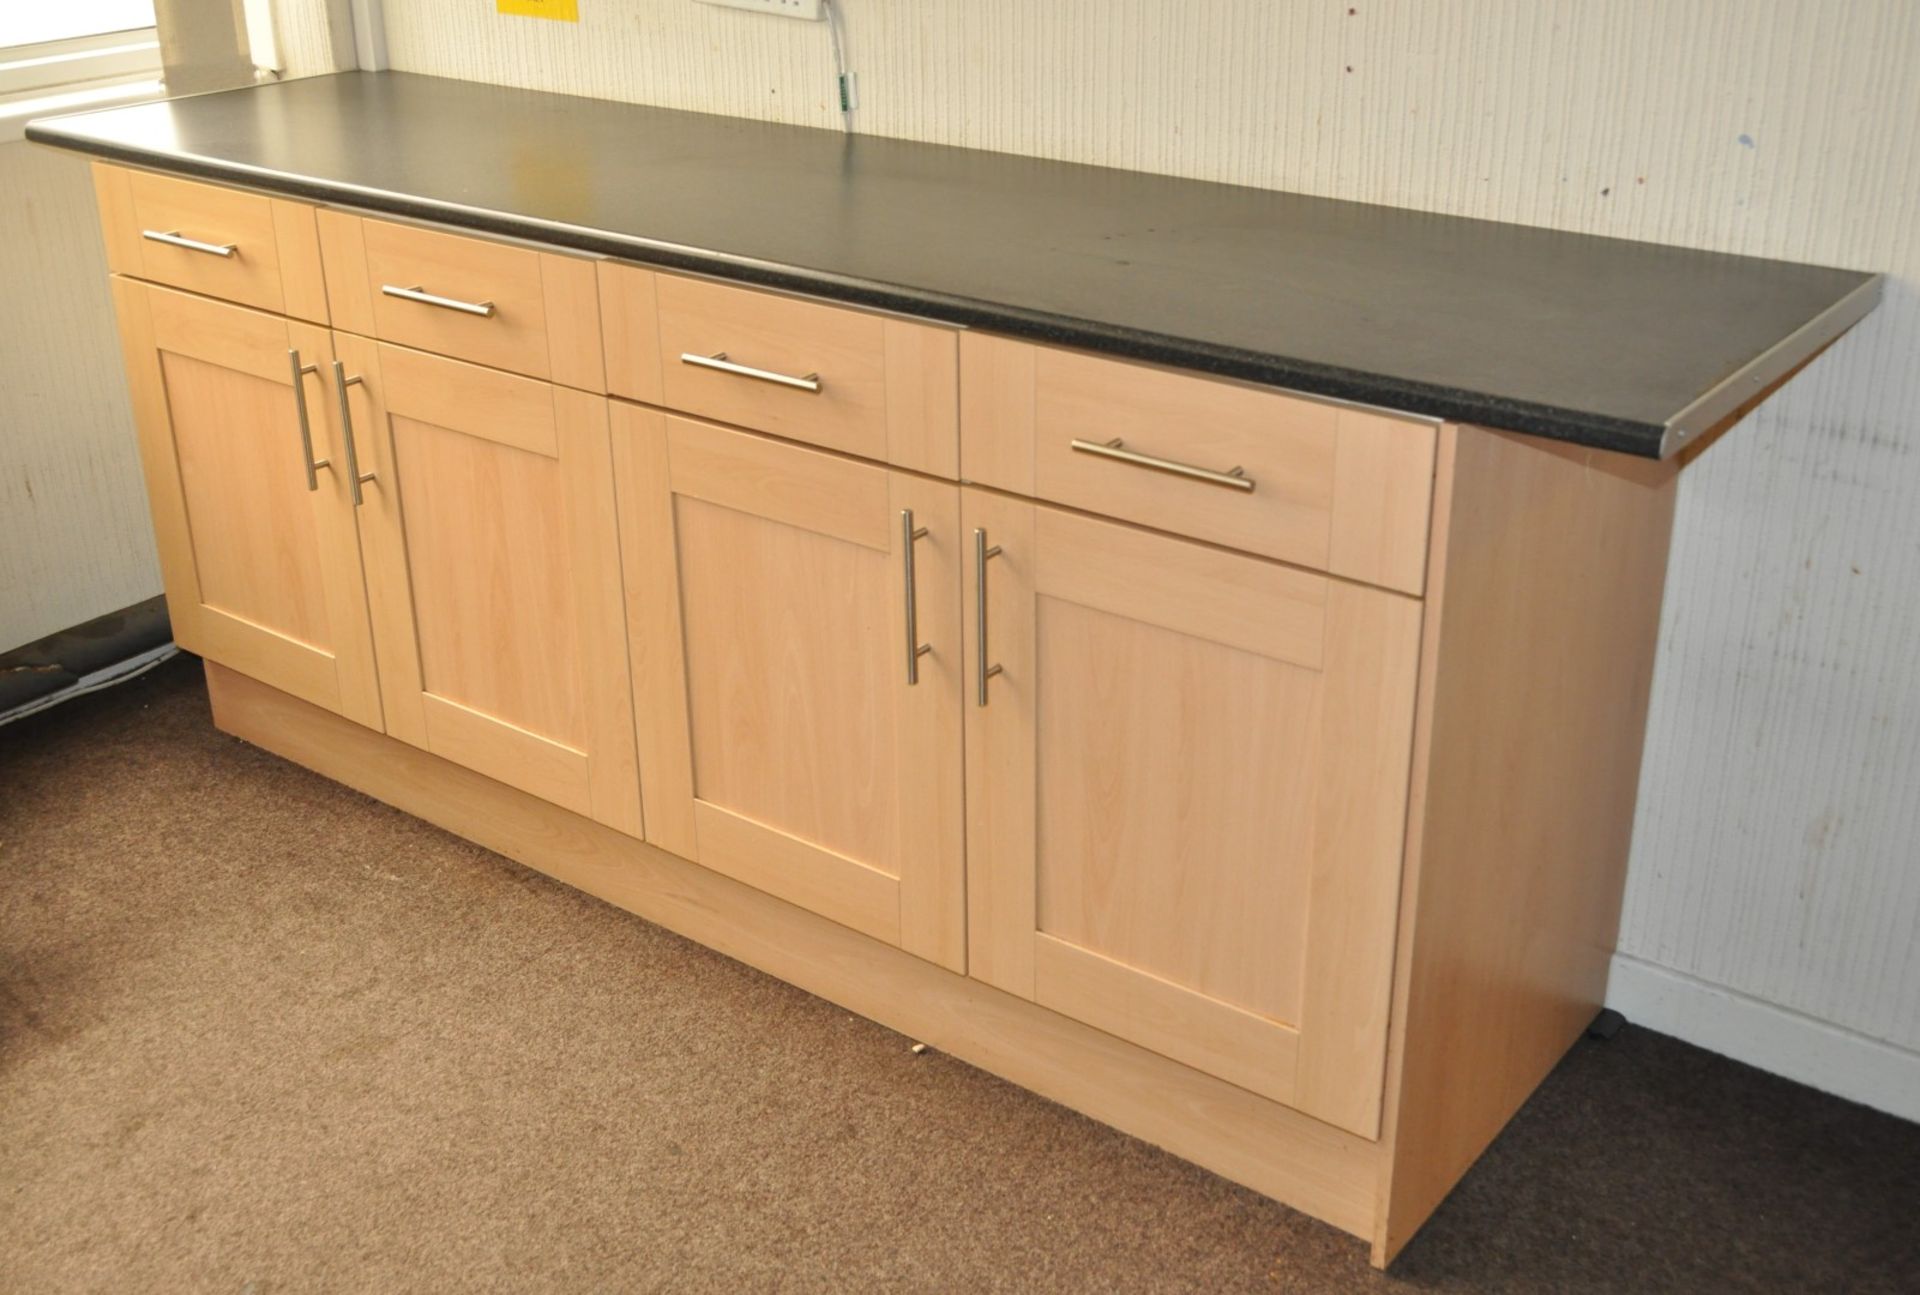 1 x Selection of Fitted Kitchen Units With Beech Shaker Style Doors and Worktop - Ideal For - Image 5 of 7